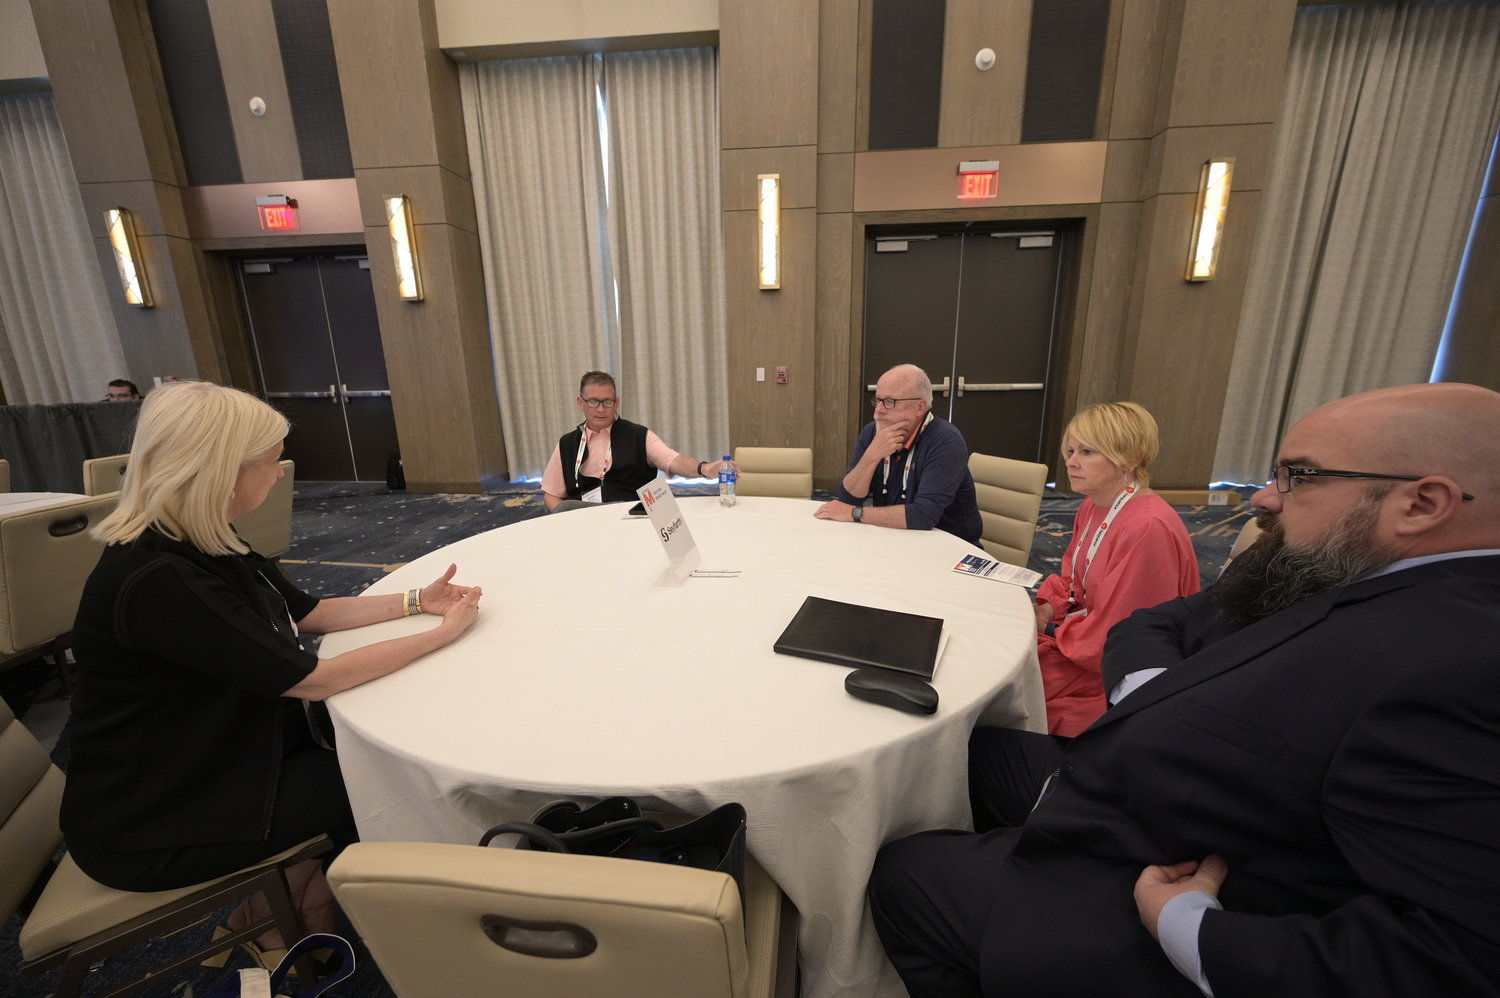 The discussion at the Seyfarth Roundtable centered on the hottest legal topics for newspaper executives. (Photo by Phelan M. Ebenhack)